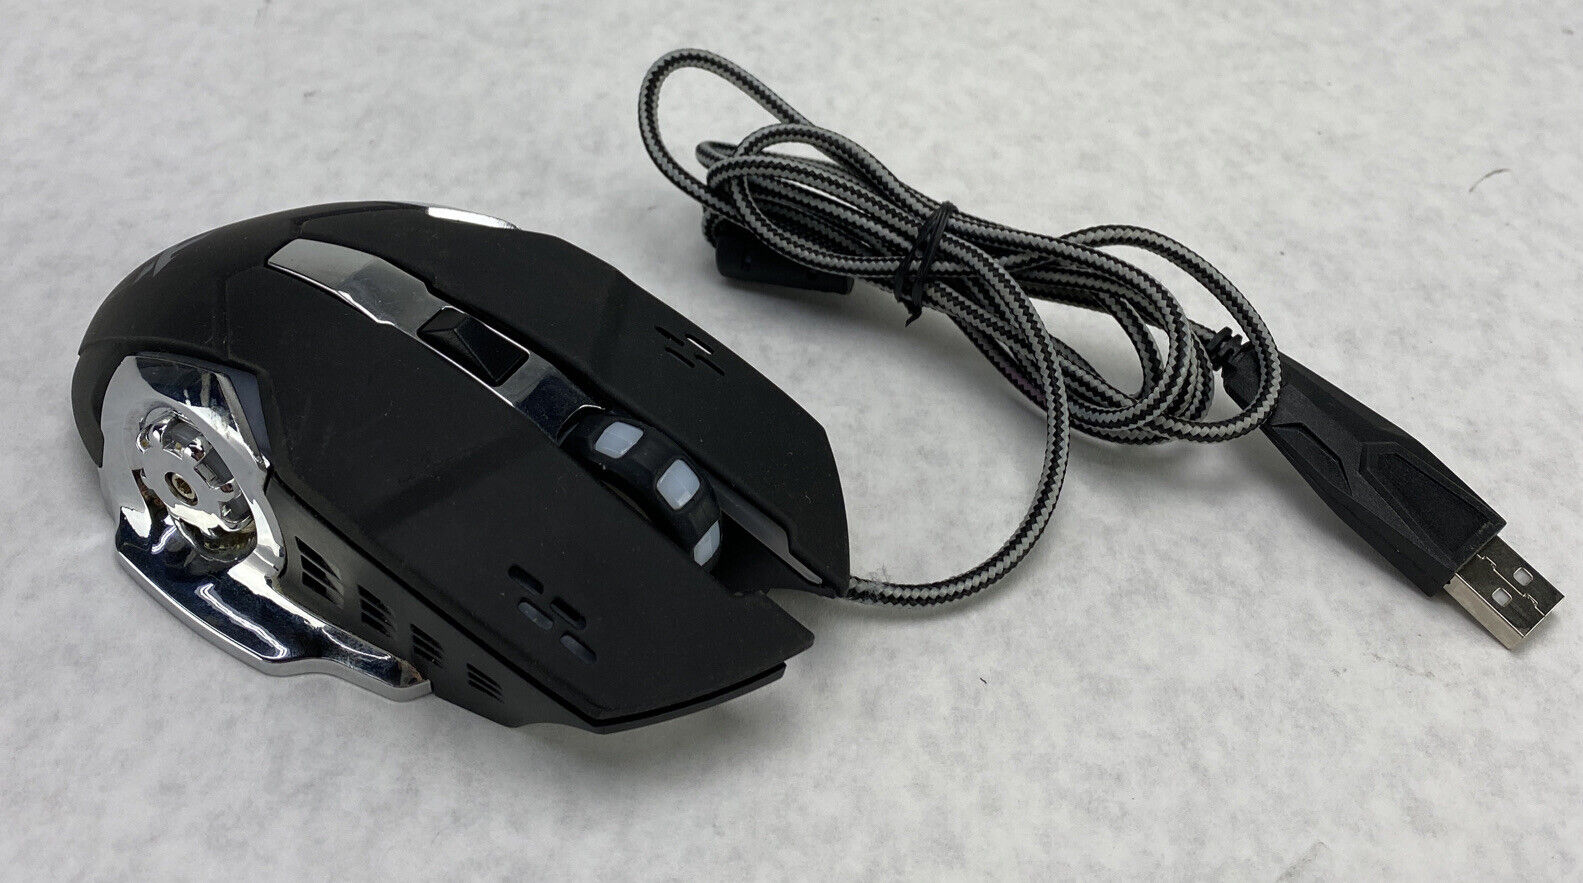 Lenrue G3 E-Sports Gaming Mouse Black w/ Faux Chrome Gears Motif TESTED